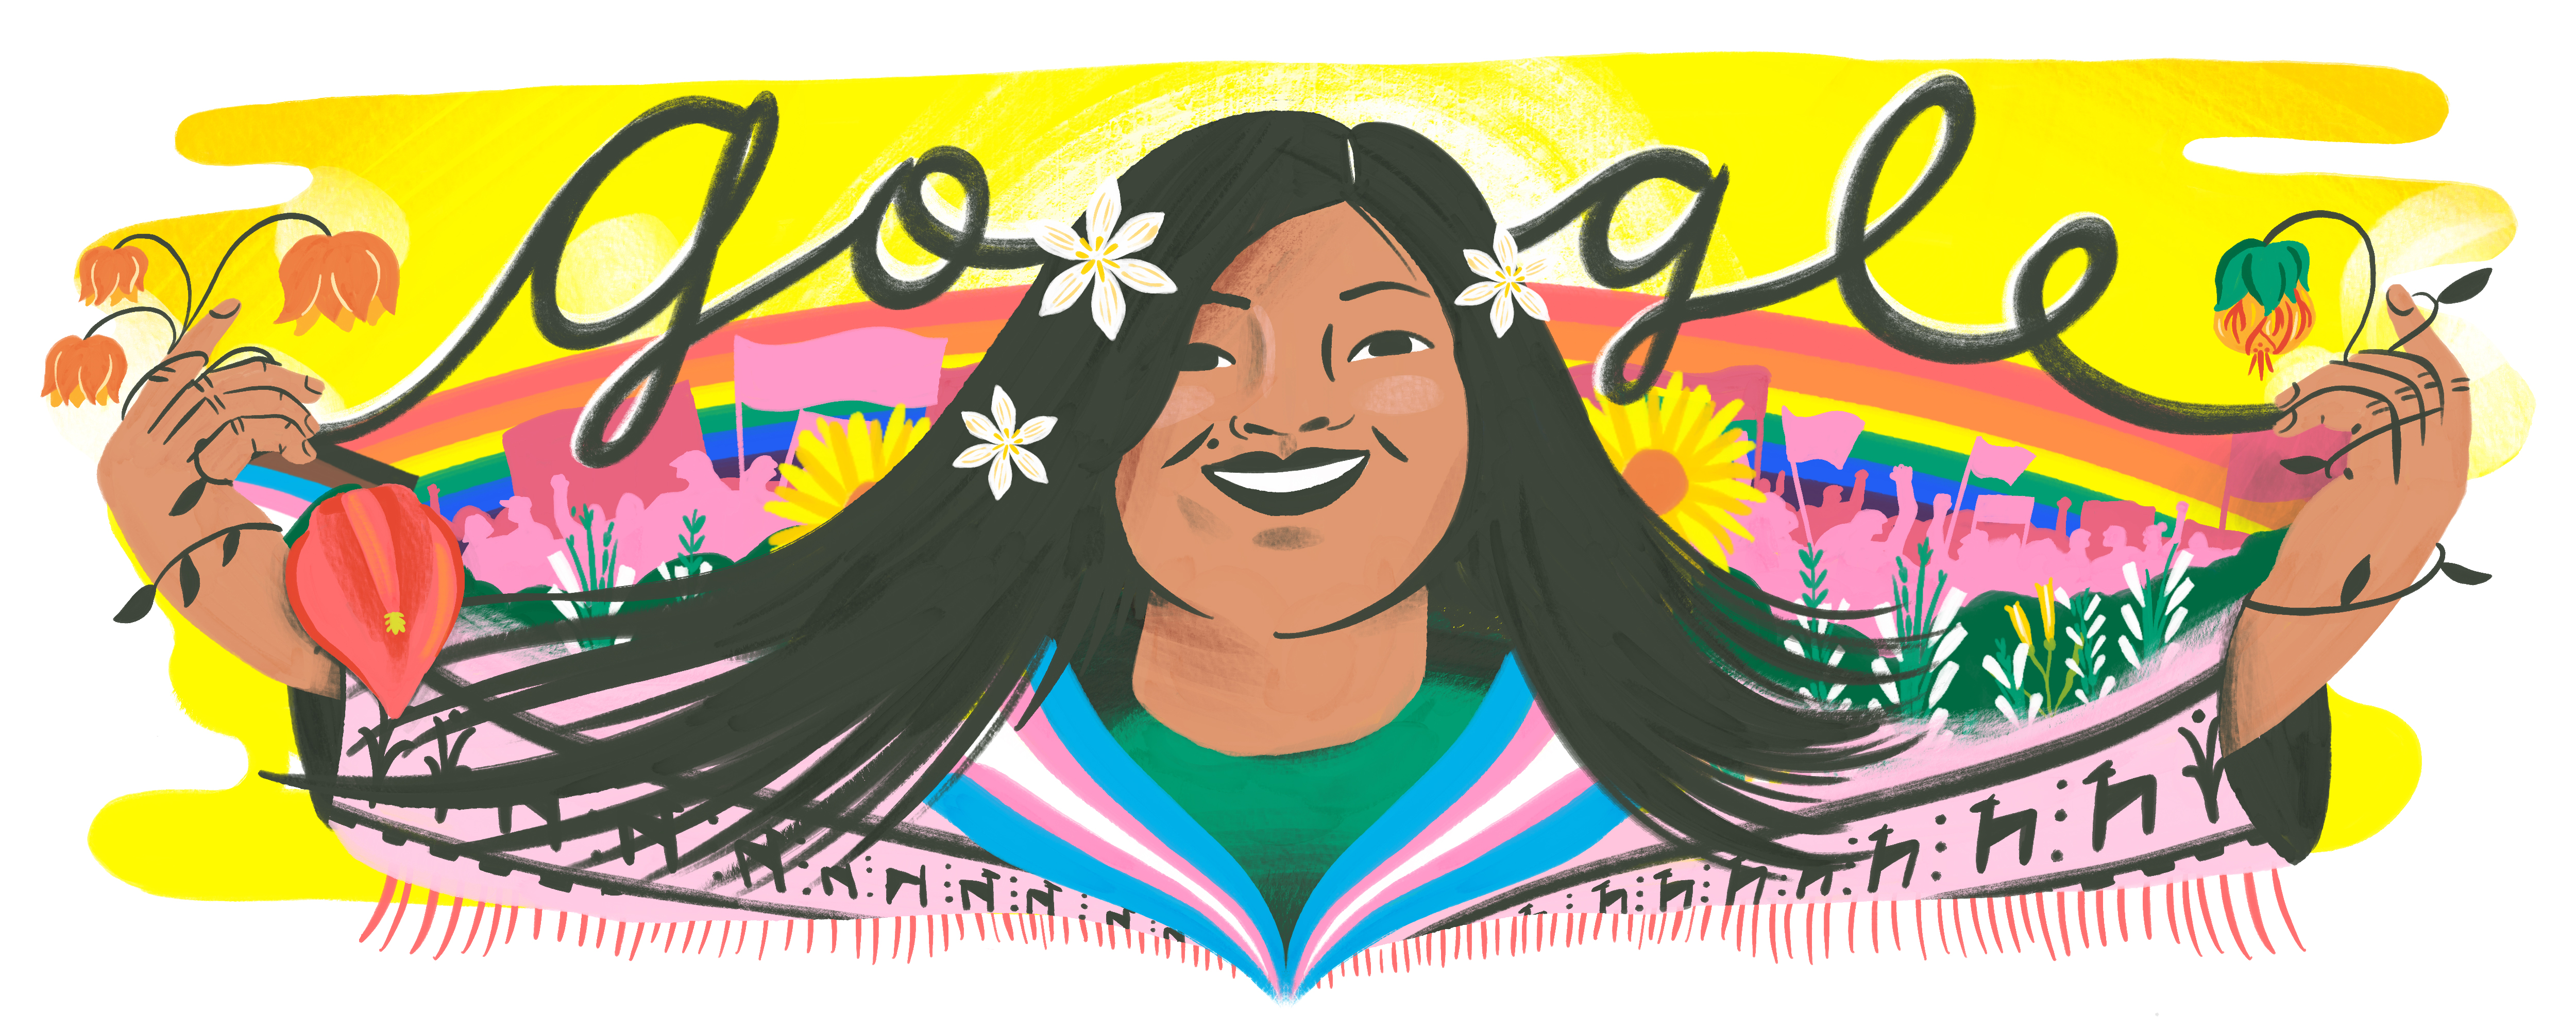 illustrated portrait of Diana Sacayán from the chest up, with both of her arms extended out to the sides. She has long, striaght black hair, black eyes, and olive skin. She has a mole above her lip and is smiling with her teeth. She has white flowers in her hair and orange and red flowers in her hands. The Google logo is in black cursive letters behind her, sitting on top of a rainbow. There are more flowers and a pink silhouette of a crowd of people carrying banners behind her. She is wearing a green crew neck shirt and a pink jacket with an animal print, pink tassels all along the arm, and the collar is colored to look like the trans pride flag with light blue, pink, and white stripes.